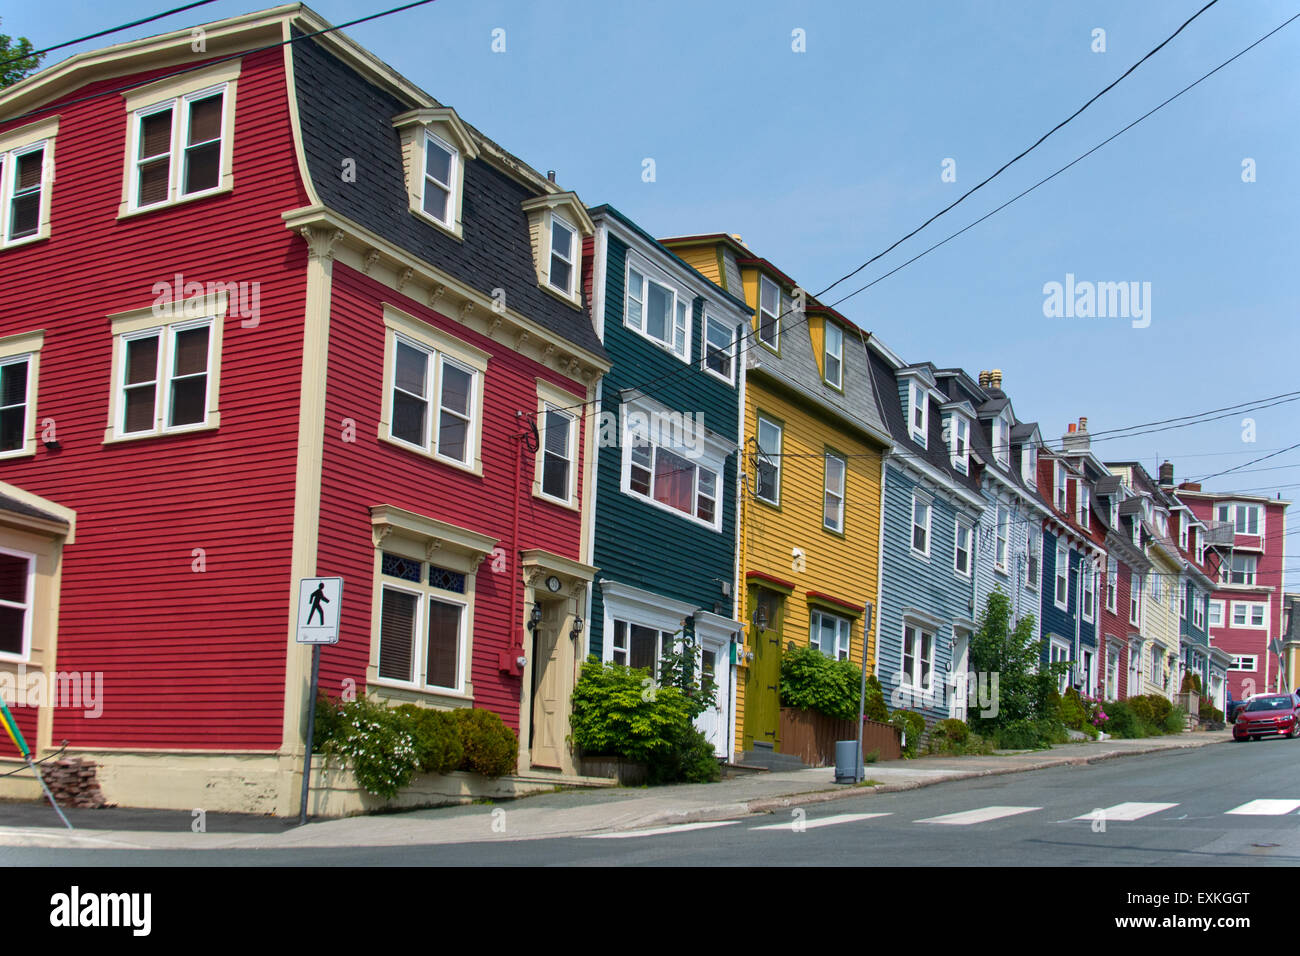 Colourful houses in St. John's, Newfoundland. Stock Photo